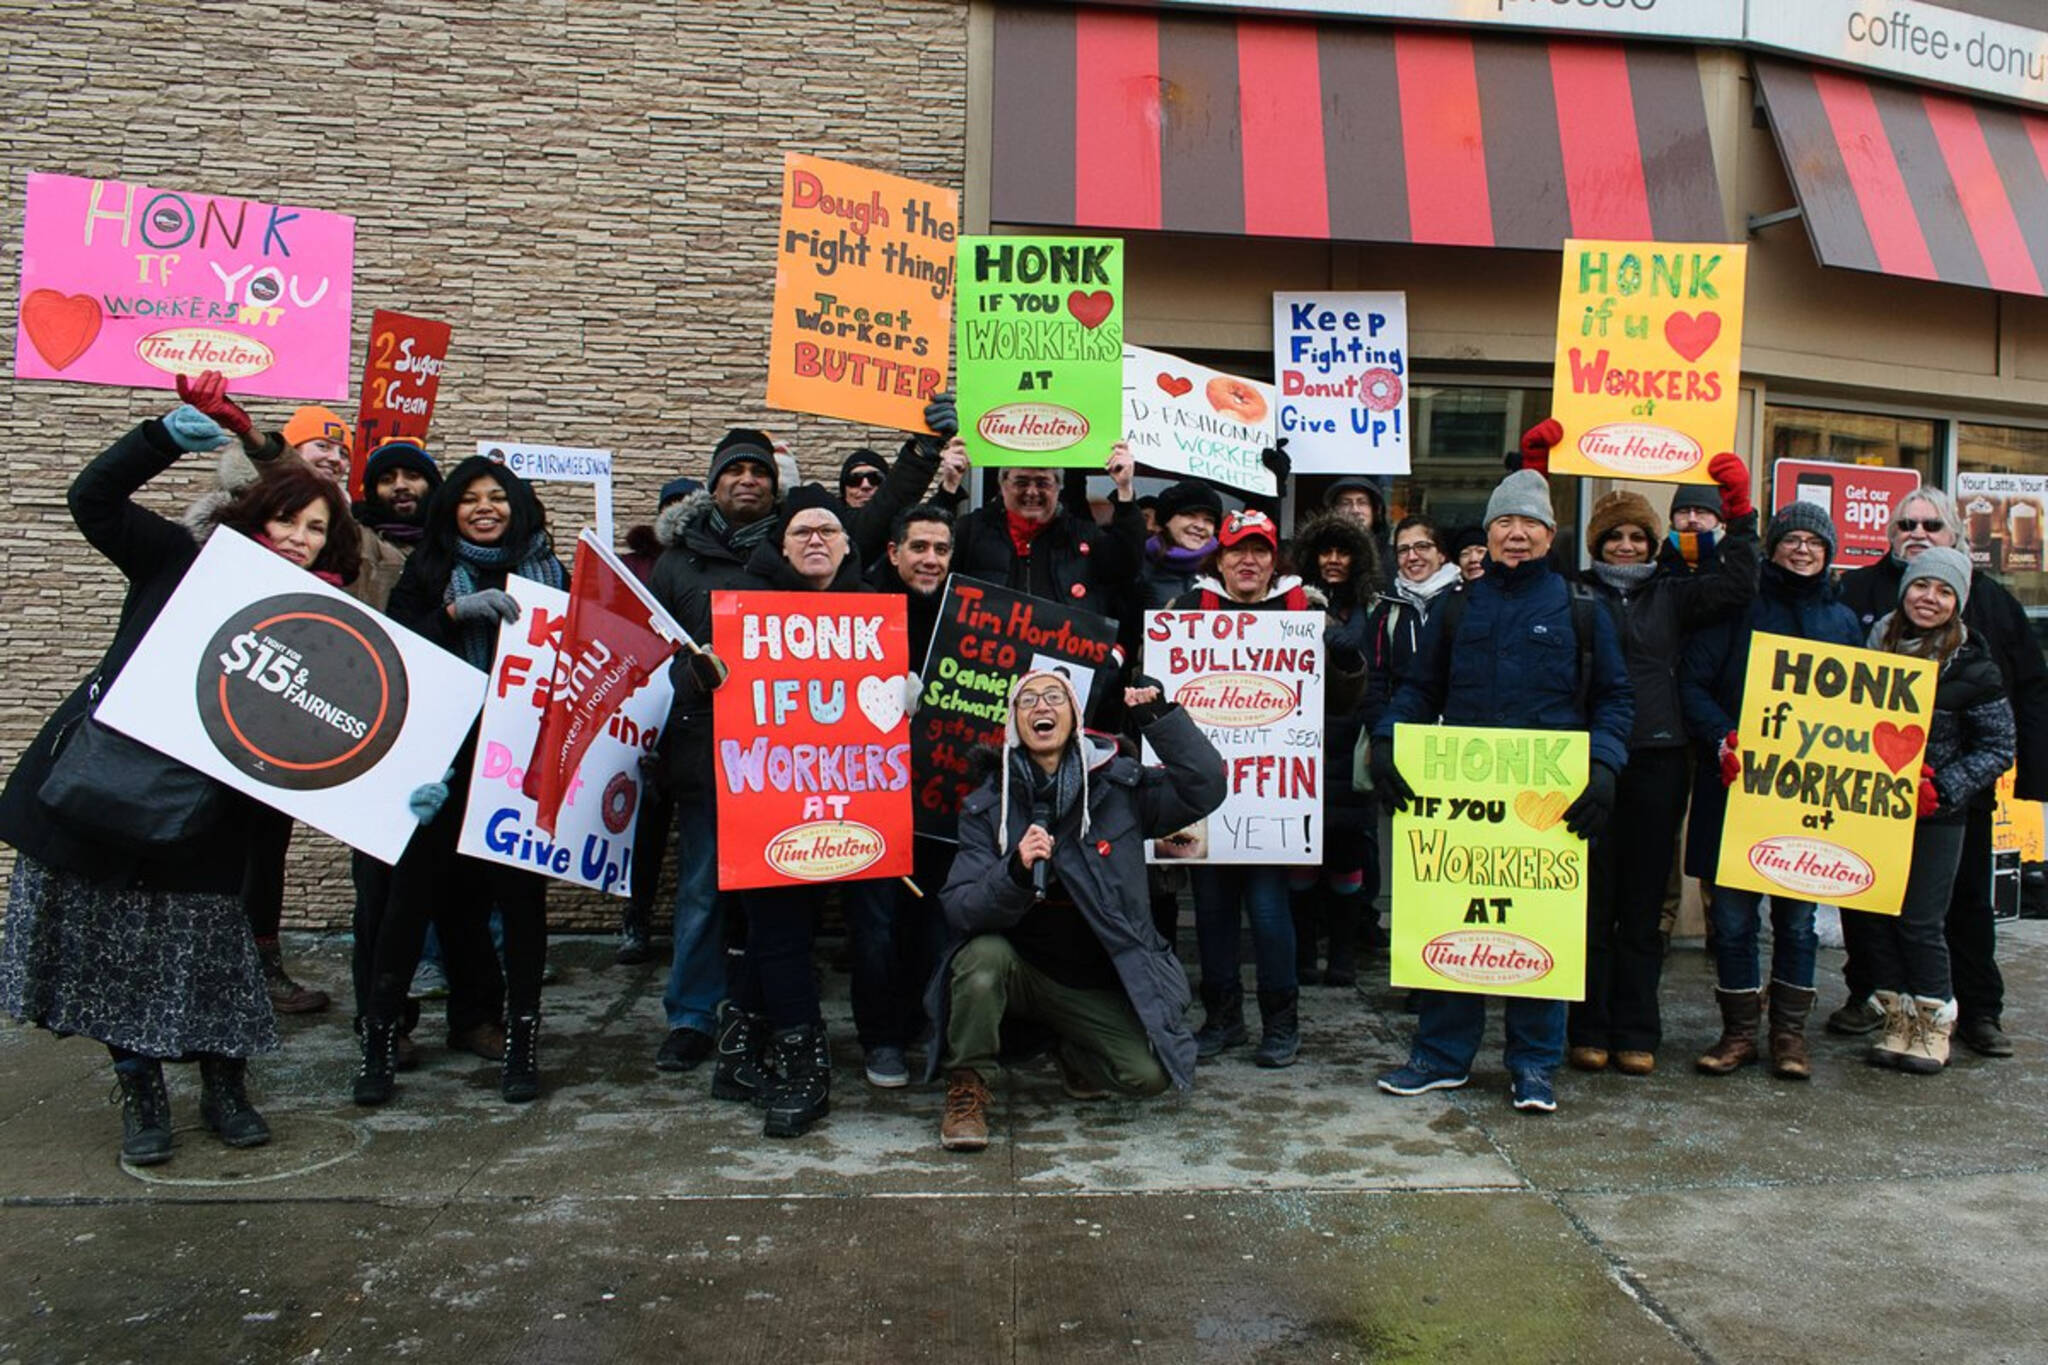 Tim Hortons protests